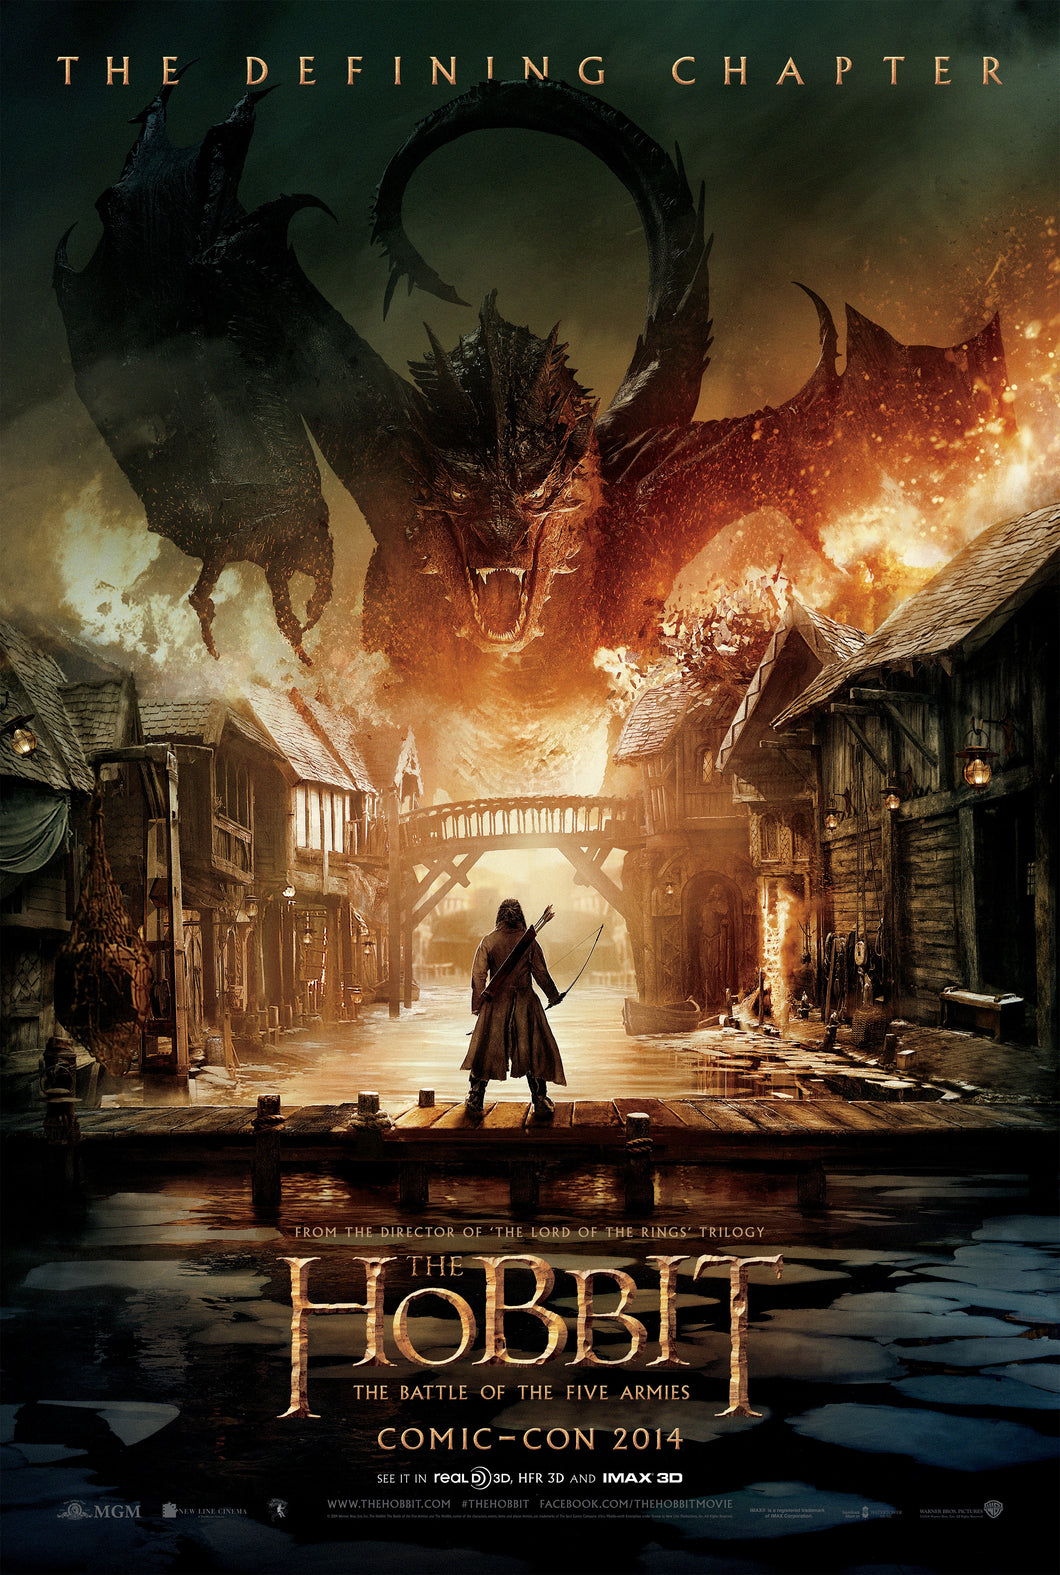 Poster Pelicula The Hobbit: The Battle of the Five Armies